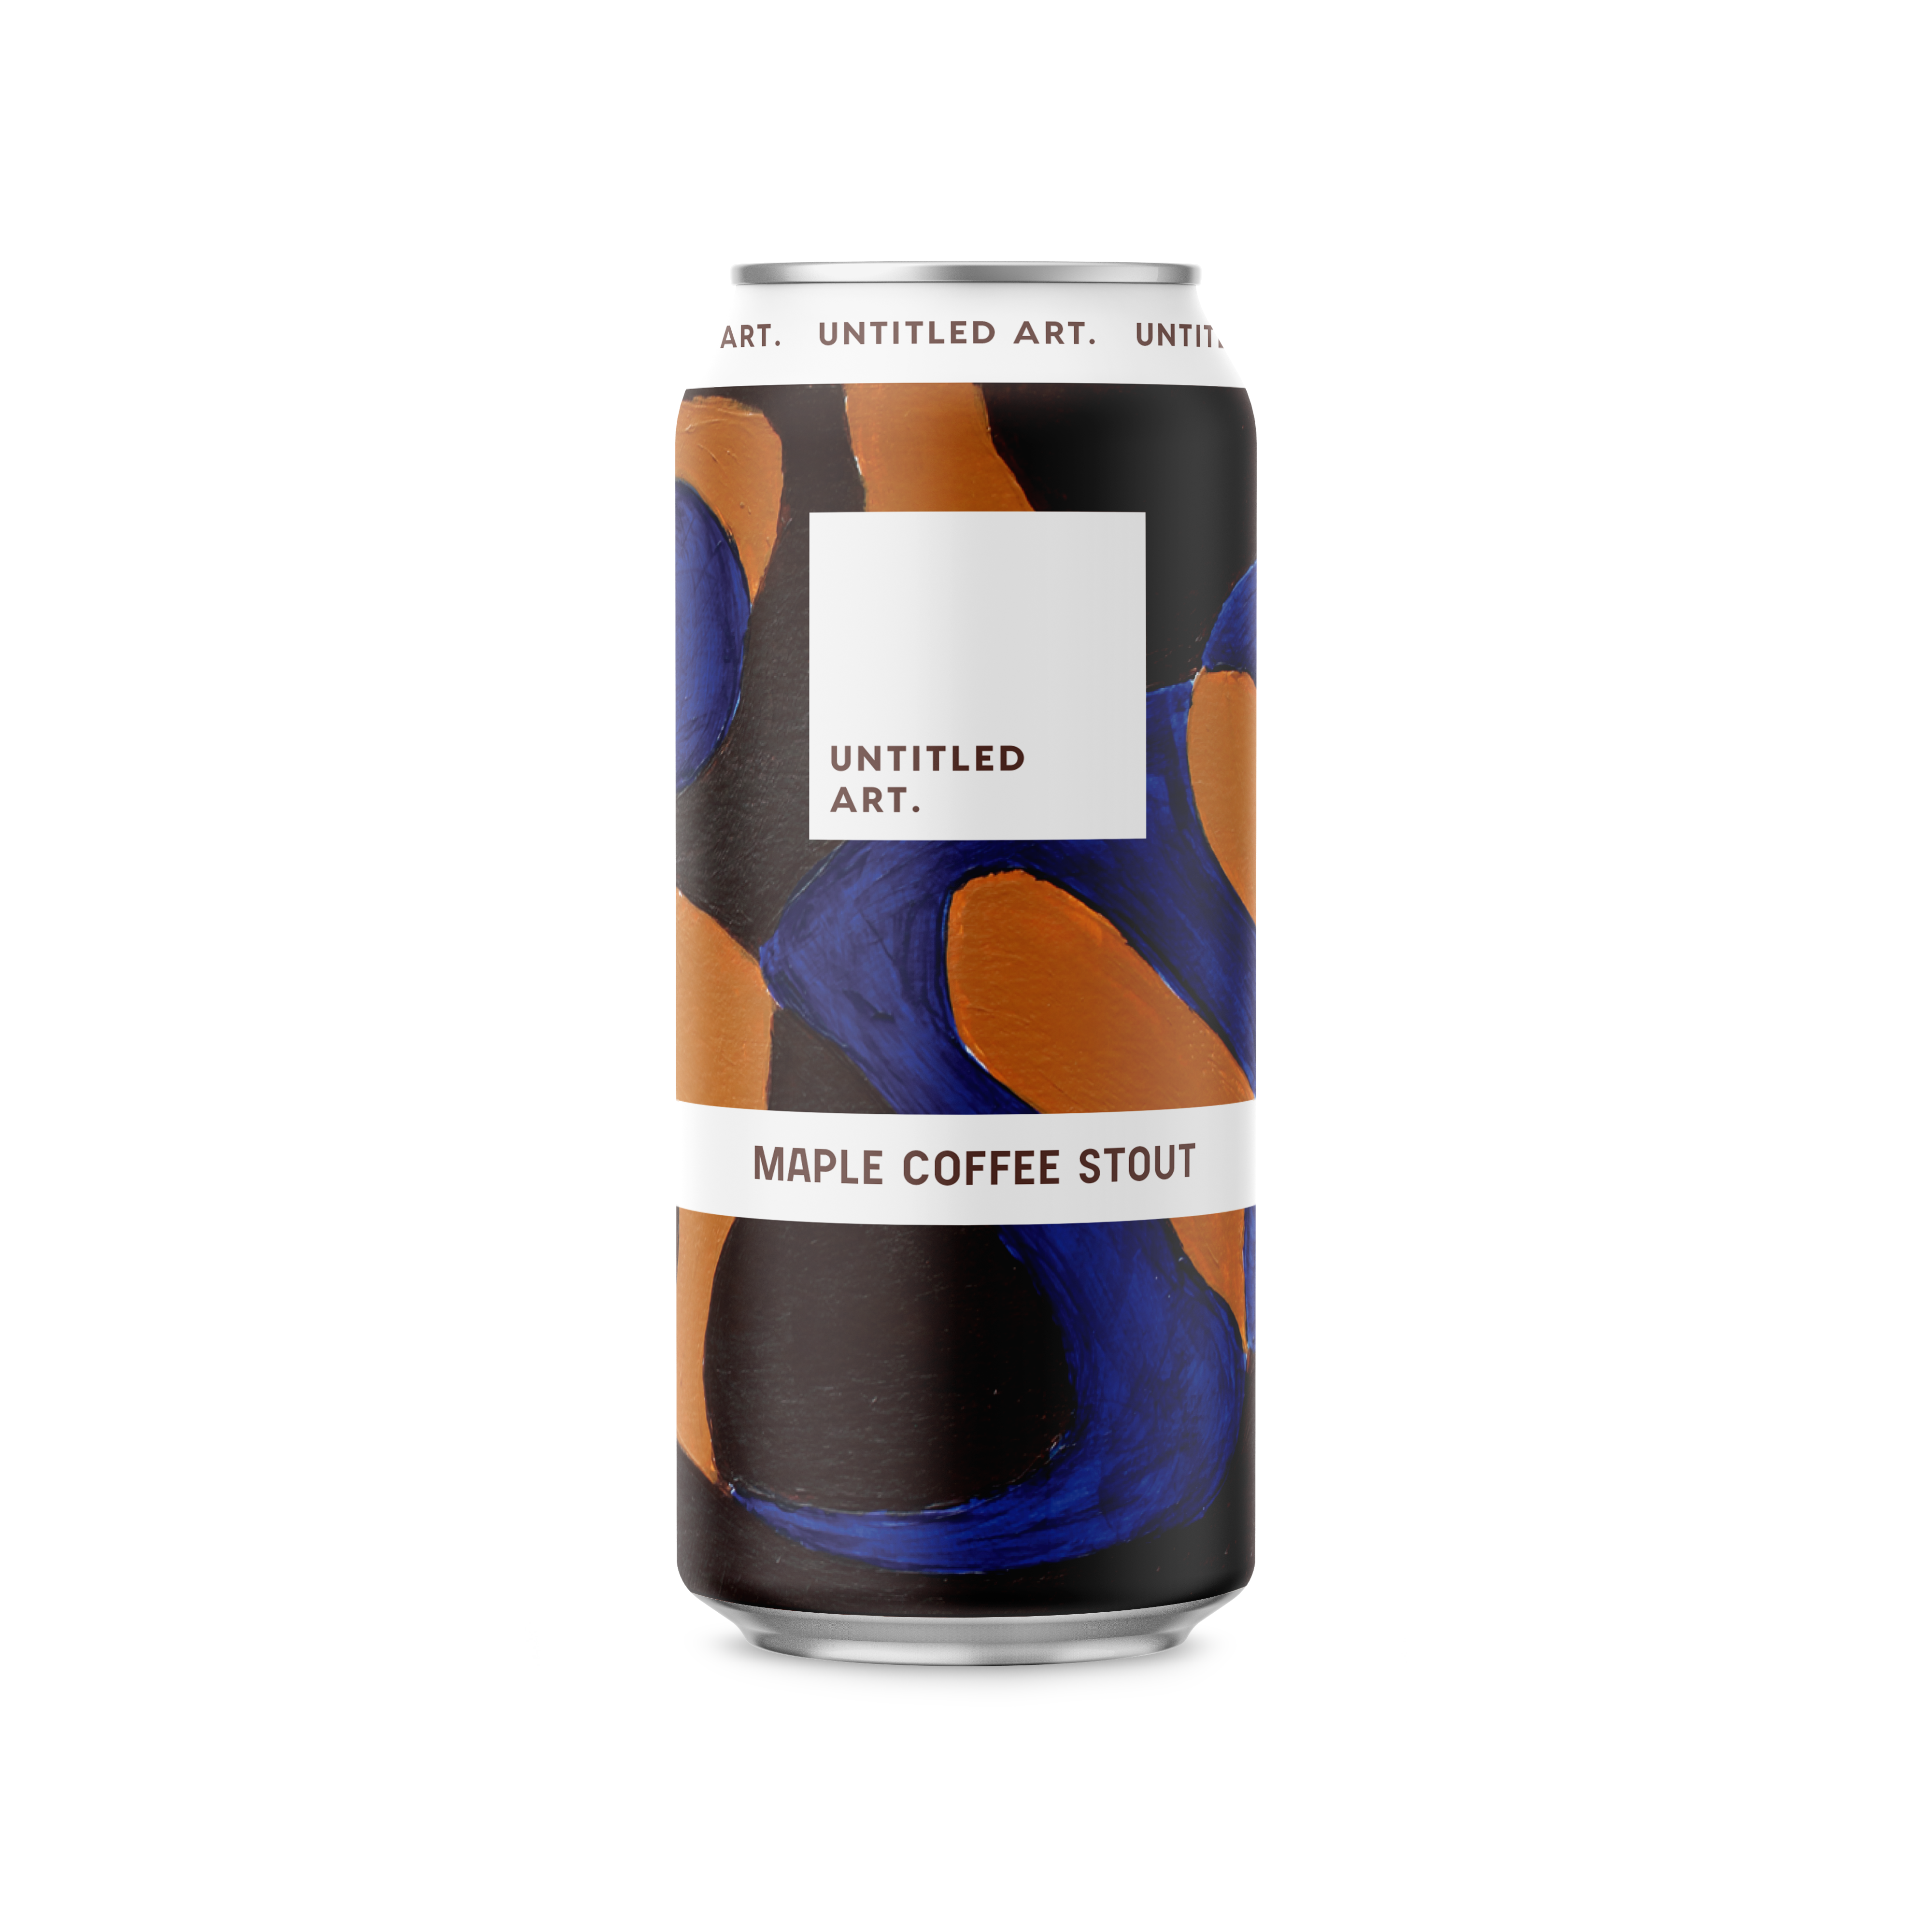 A can of coffee with a blue and orange design.